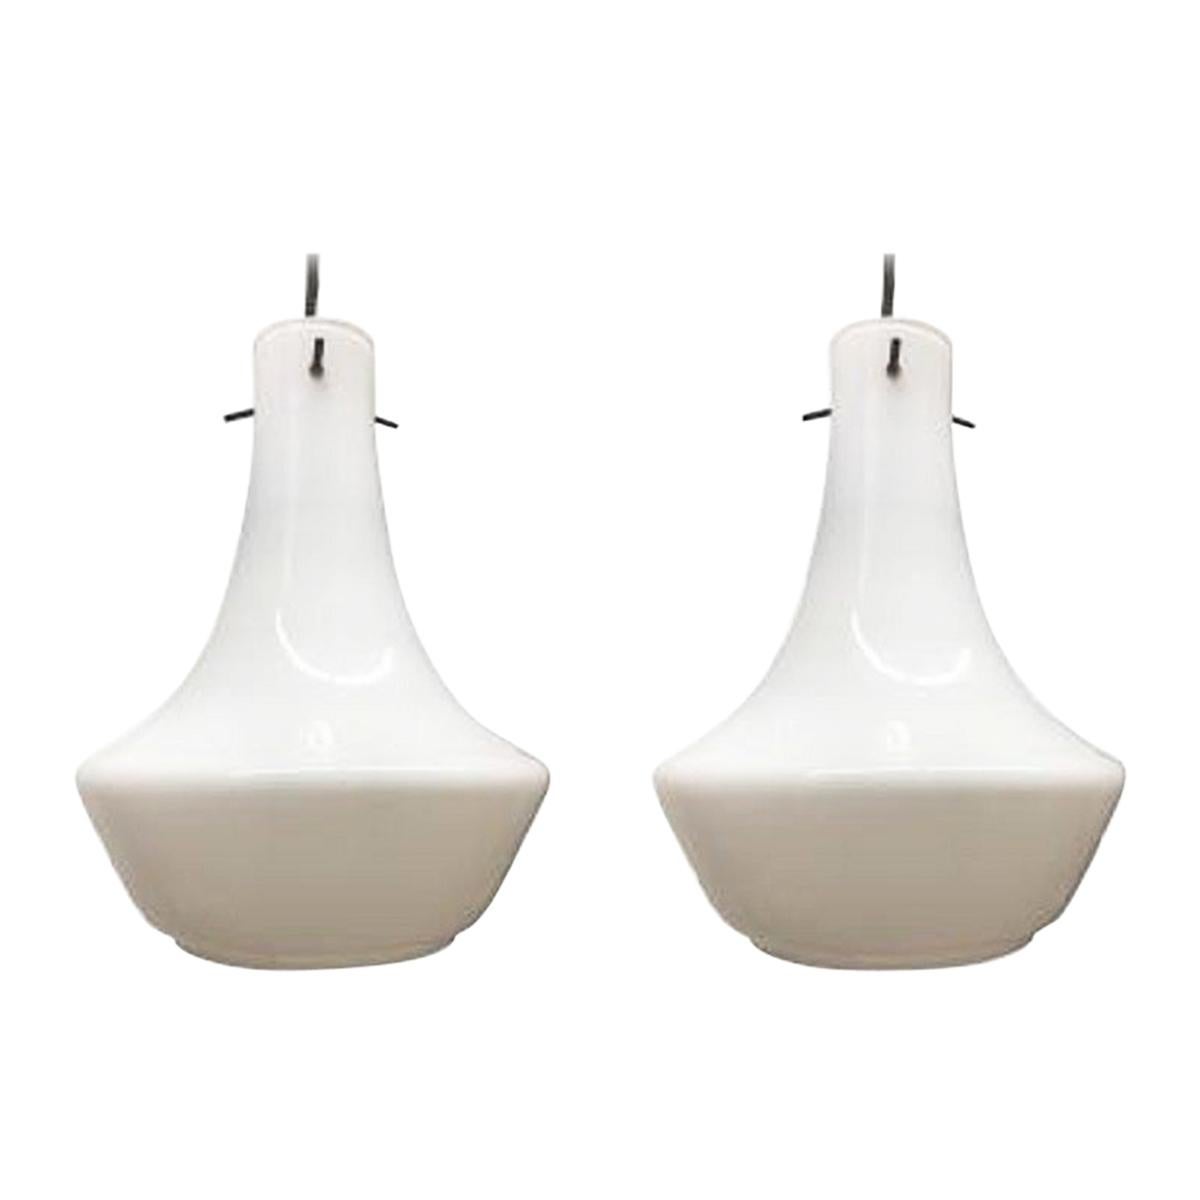 Pair of Mid-Century Modern Light Fixtures For Sale